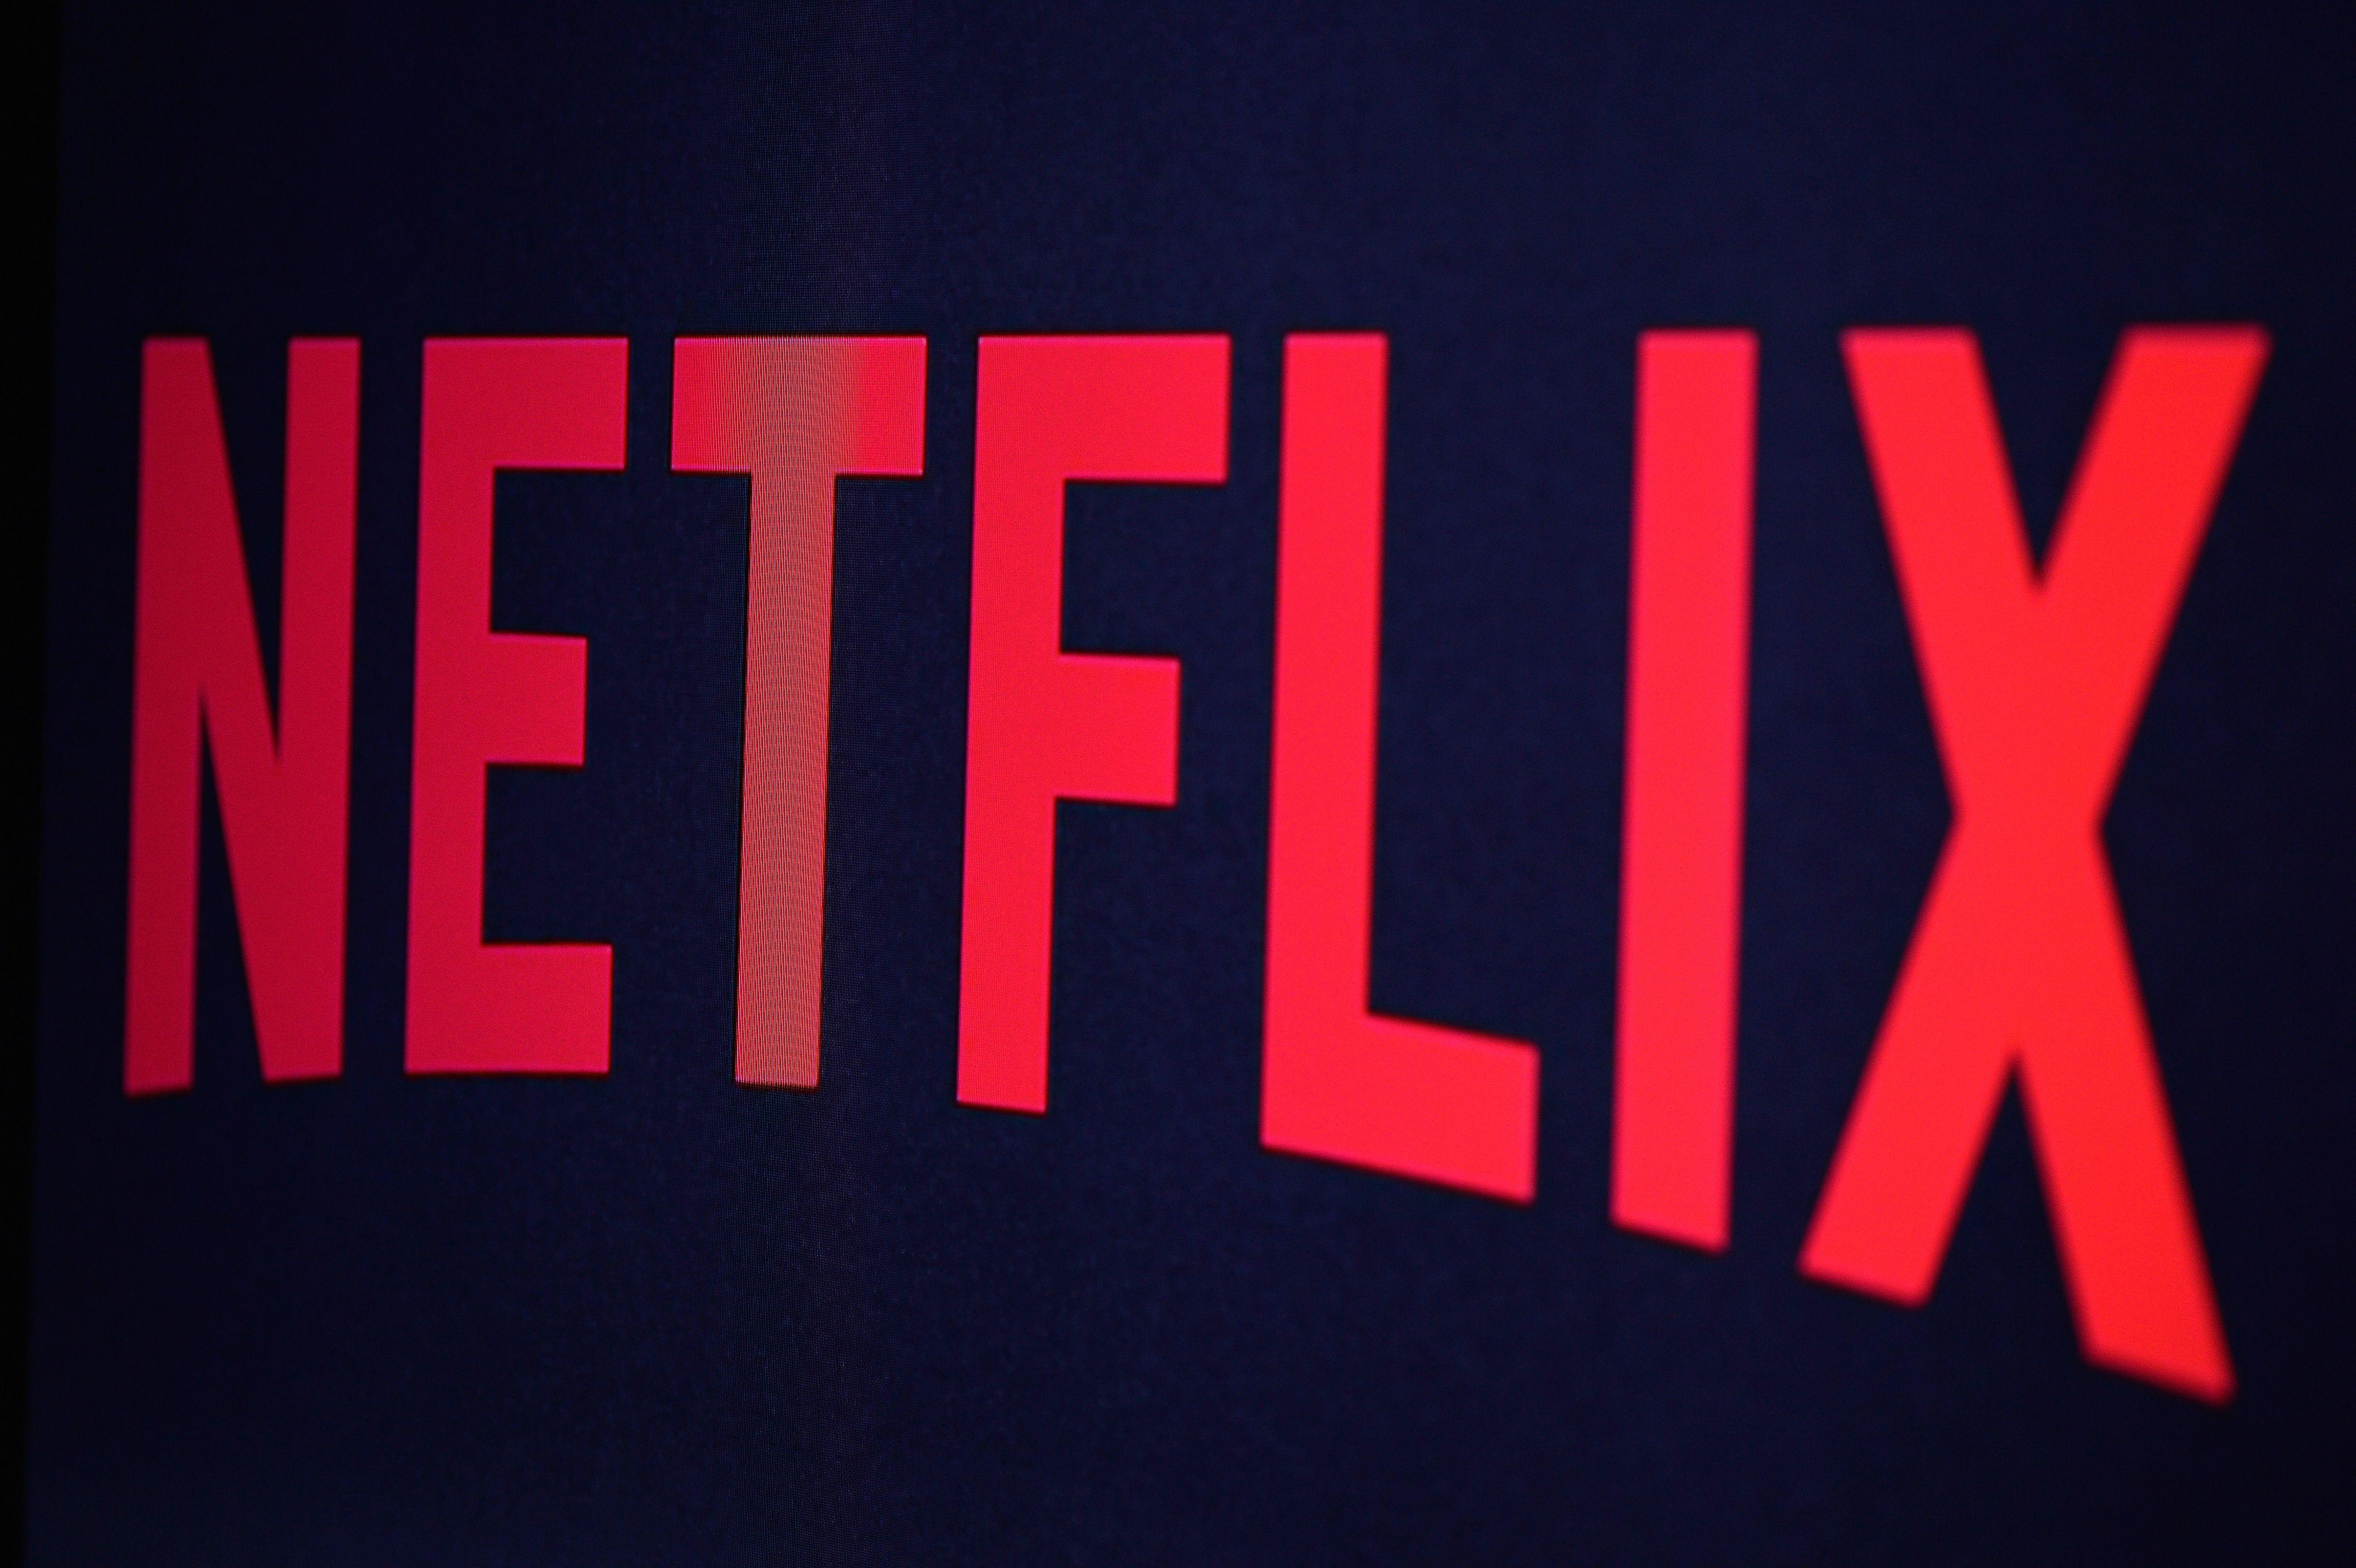 Netflicks Logo - 9 Netflix Tricks You Just Can't Live Without | Time